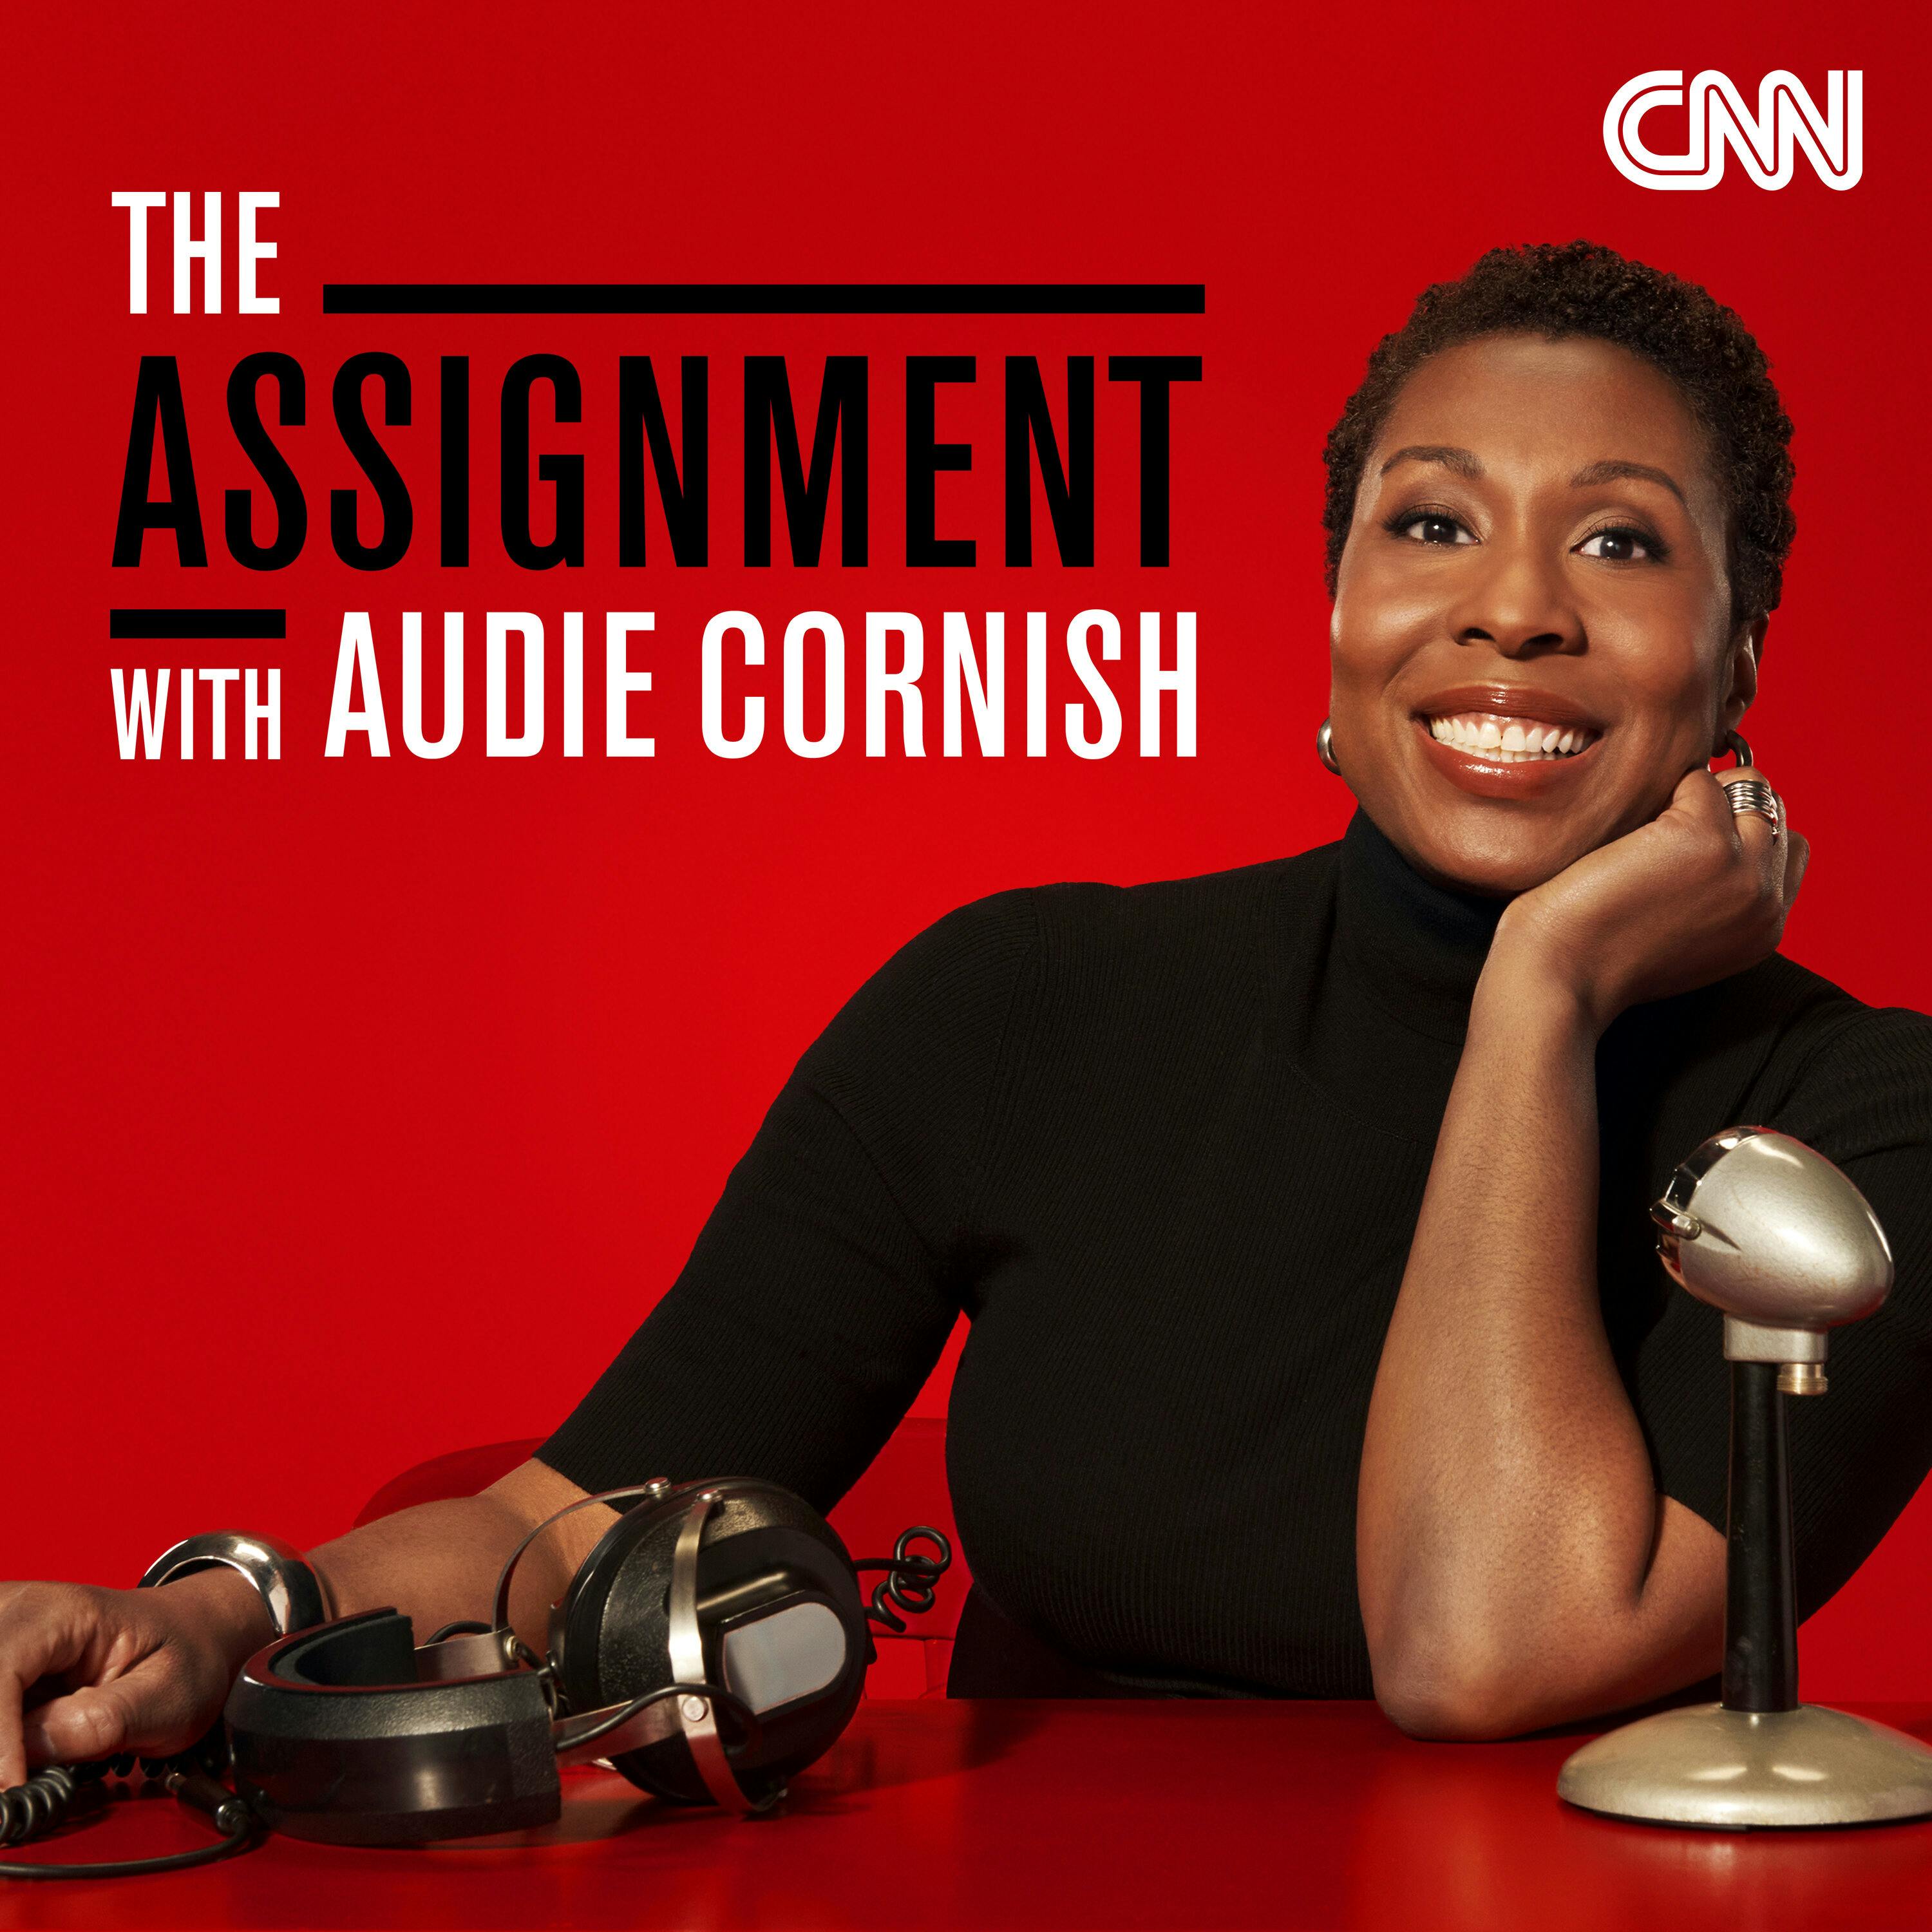 The Assignment with Audie Cornish podcast show image